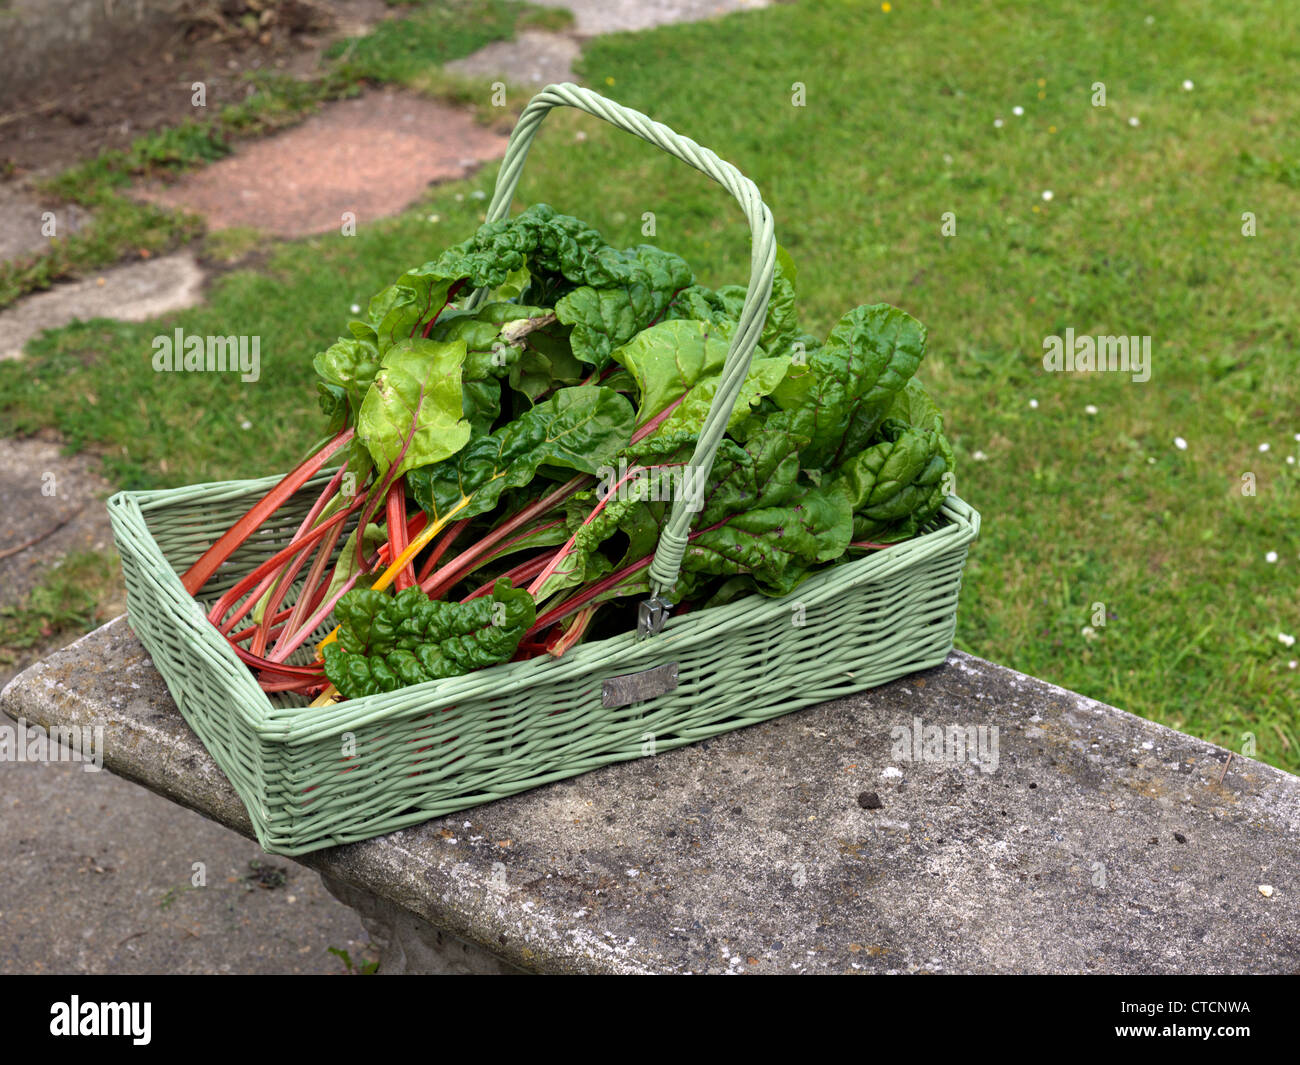 Swiss Chard Spinach Type Vegetable with Red and Yellow Stalks Beta Cicla From The Beet Family In A Trug On A Bench Stock Photo